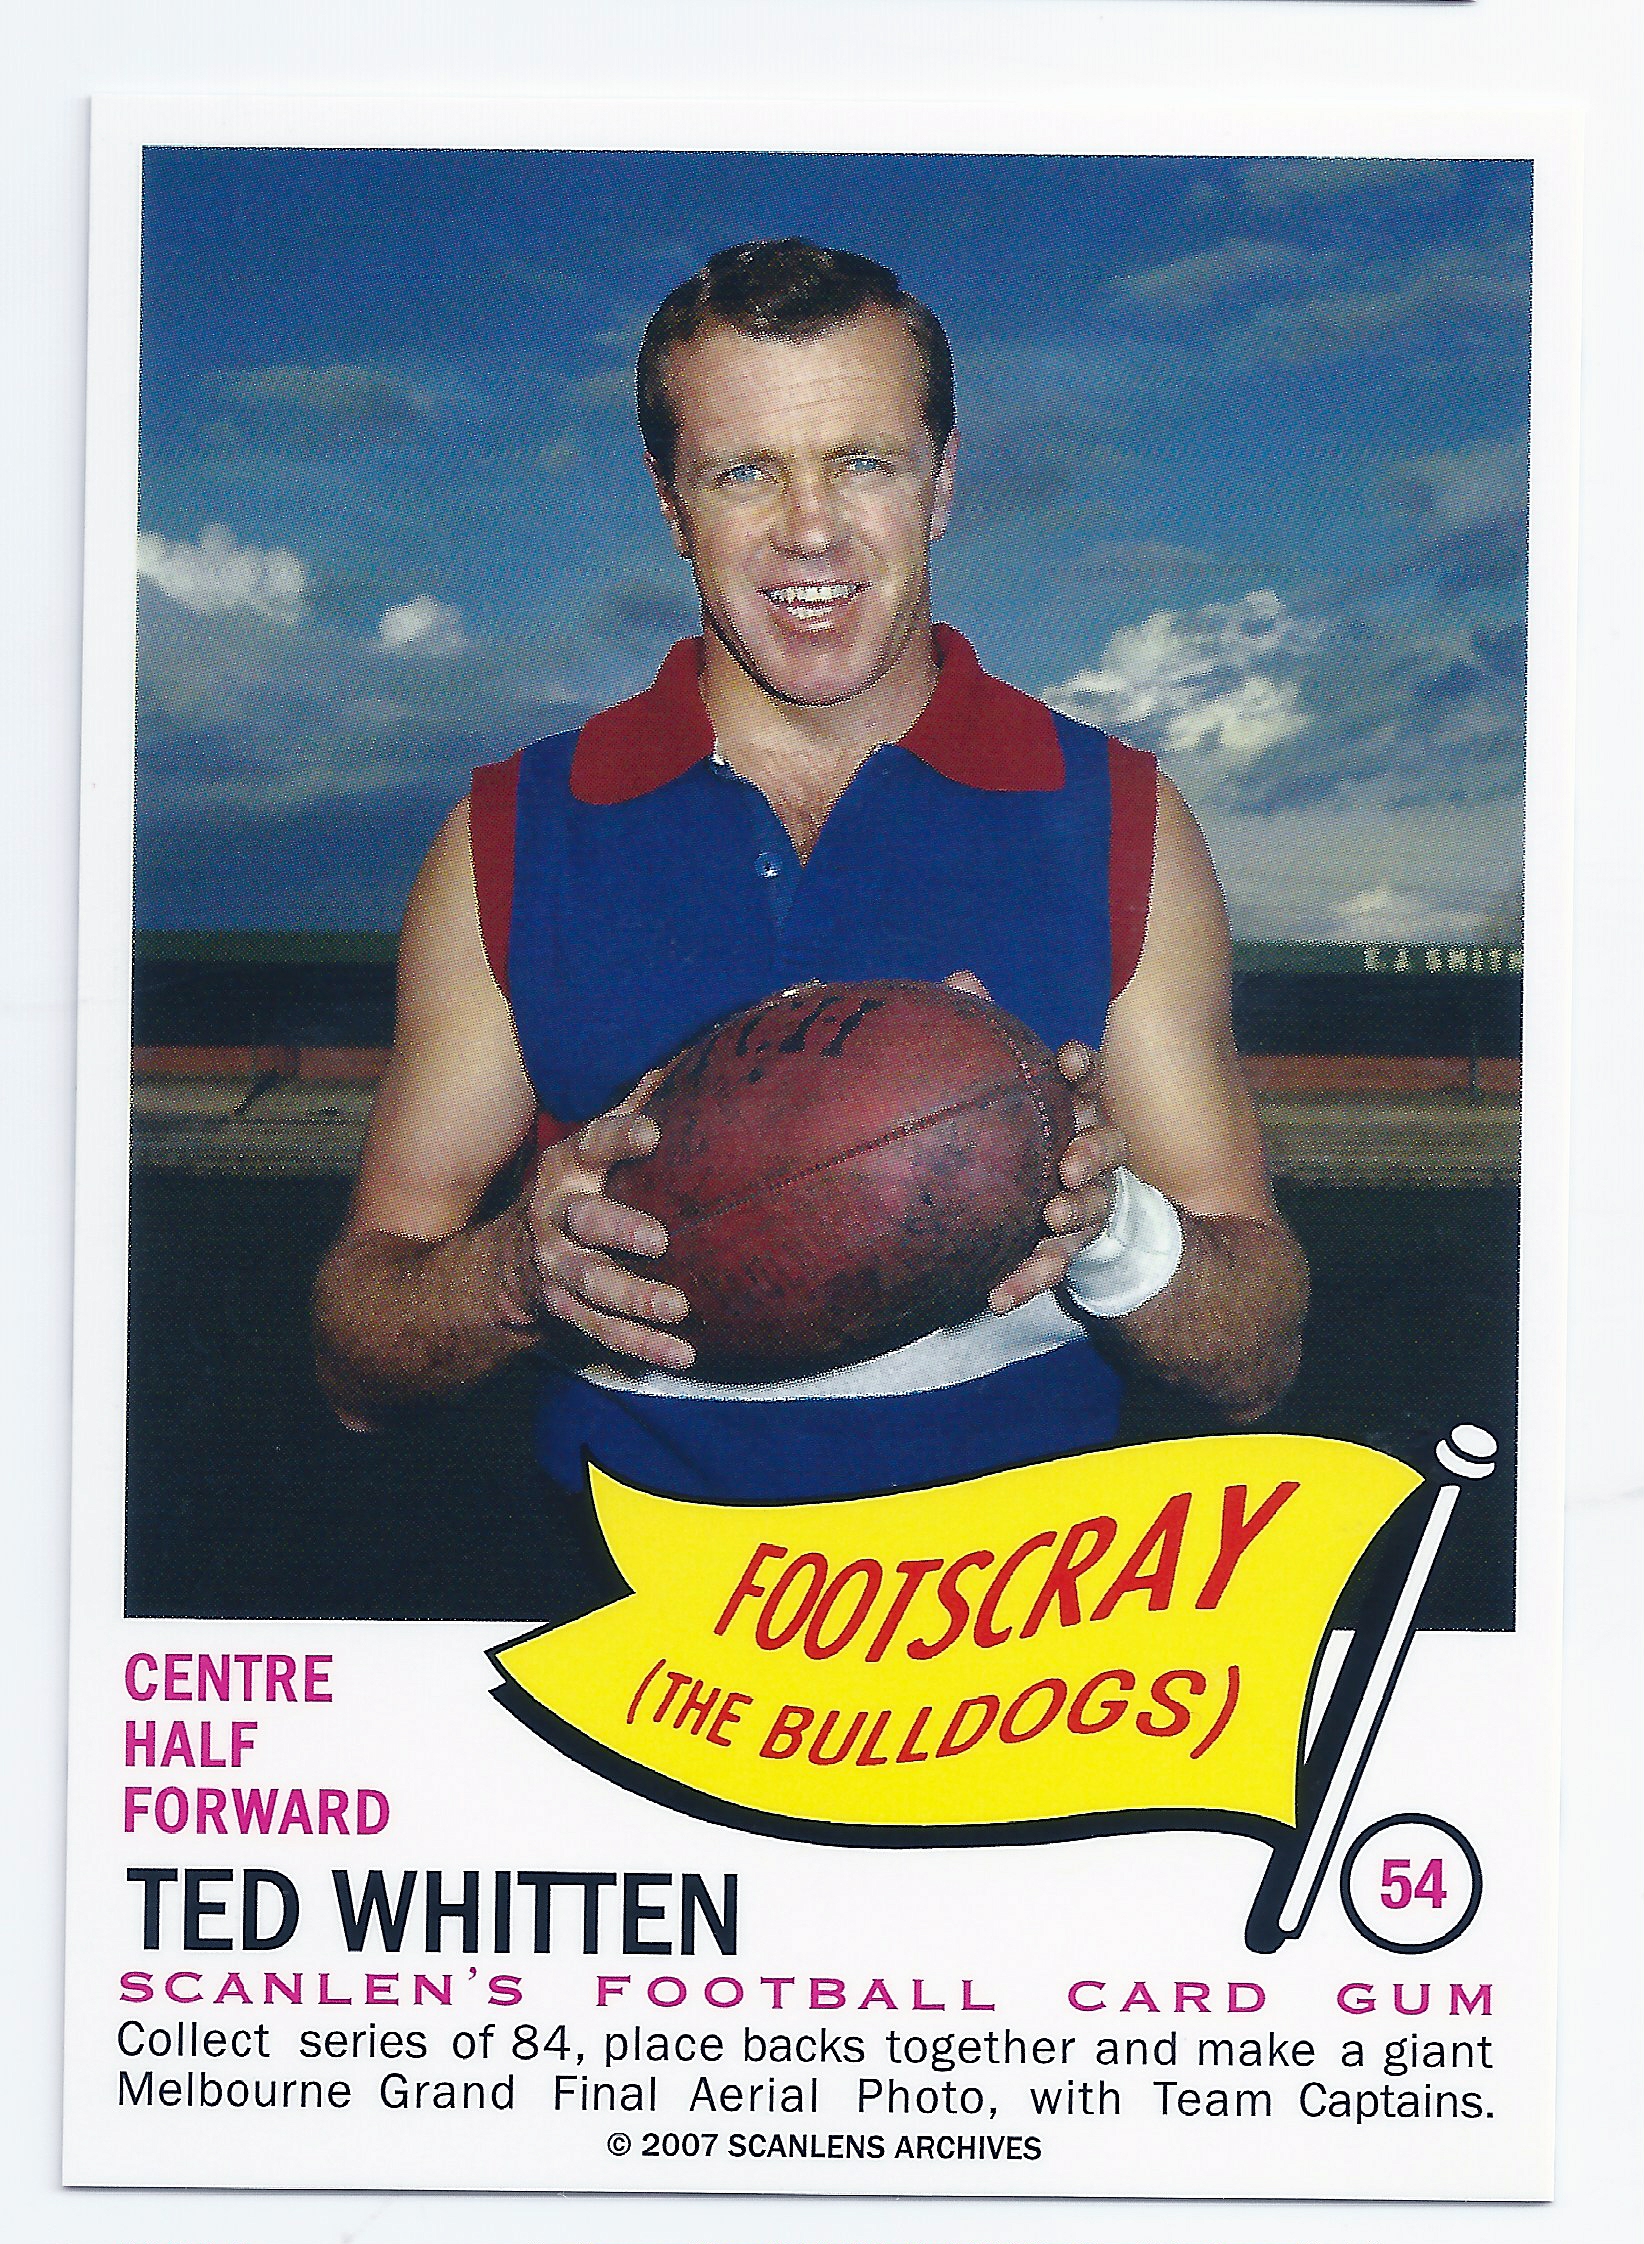 2007 – 1966 Scanlens Flag Archives (54) Ted Whitten Footscray